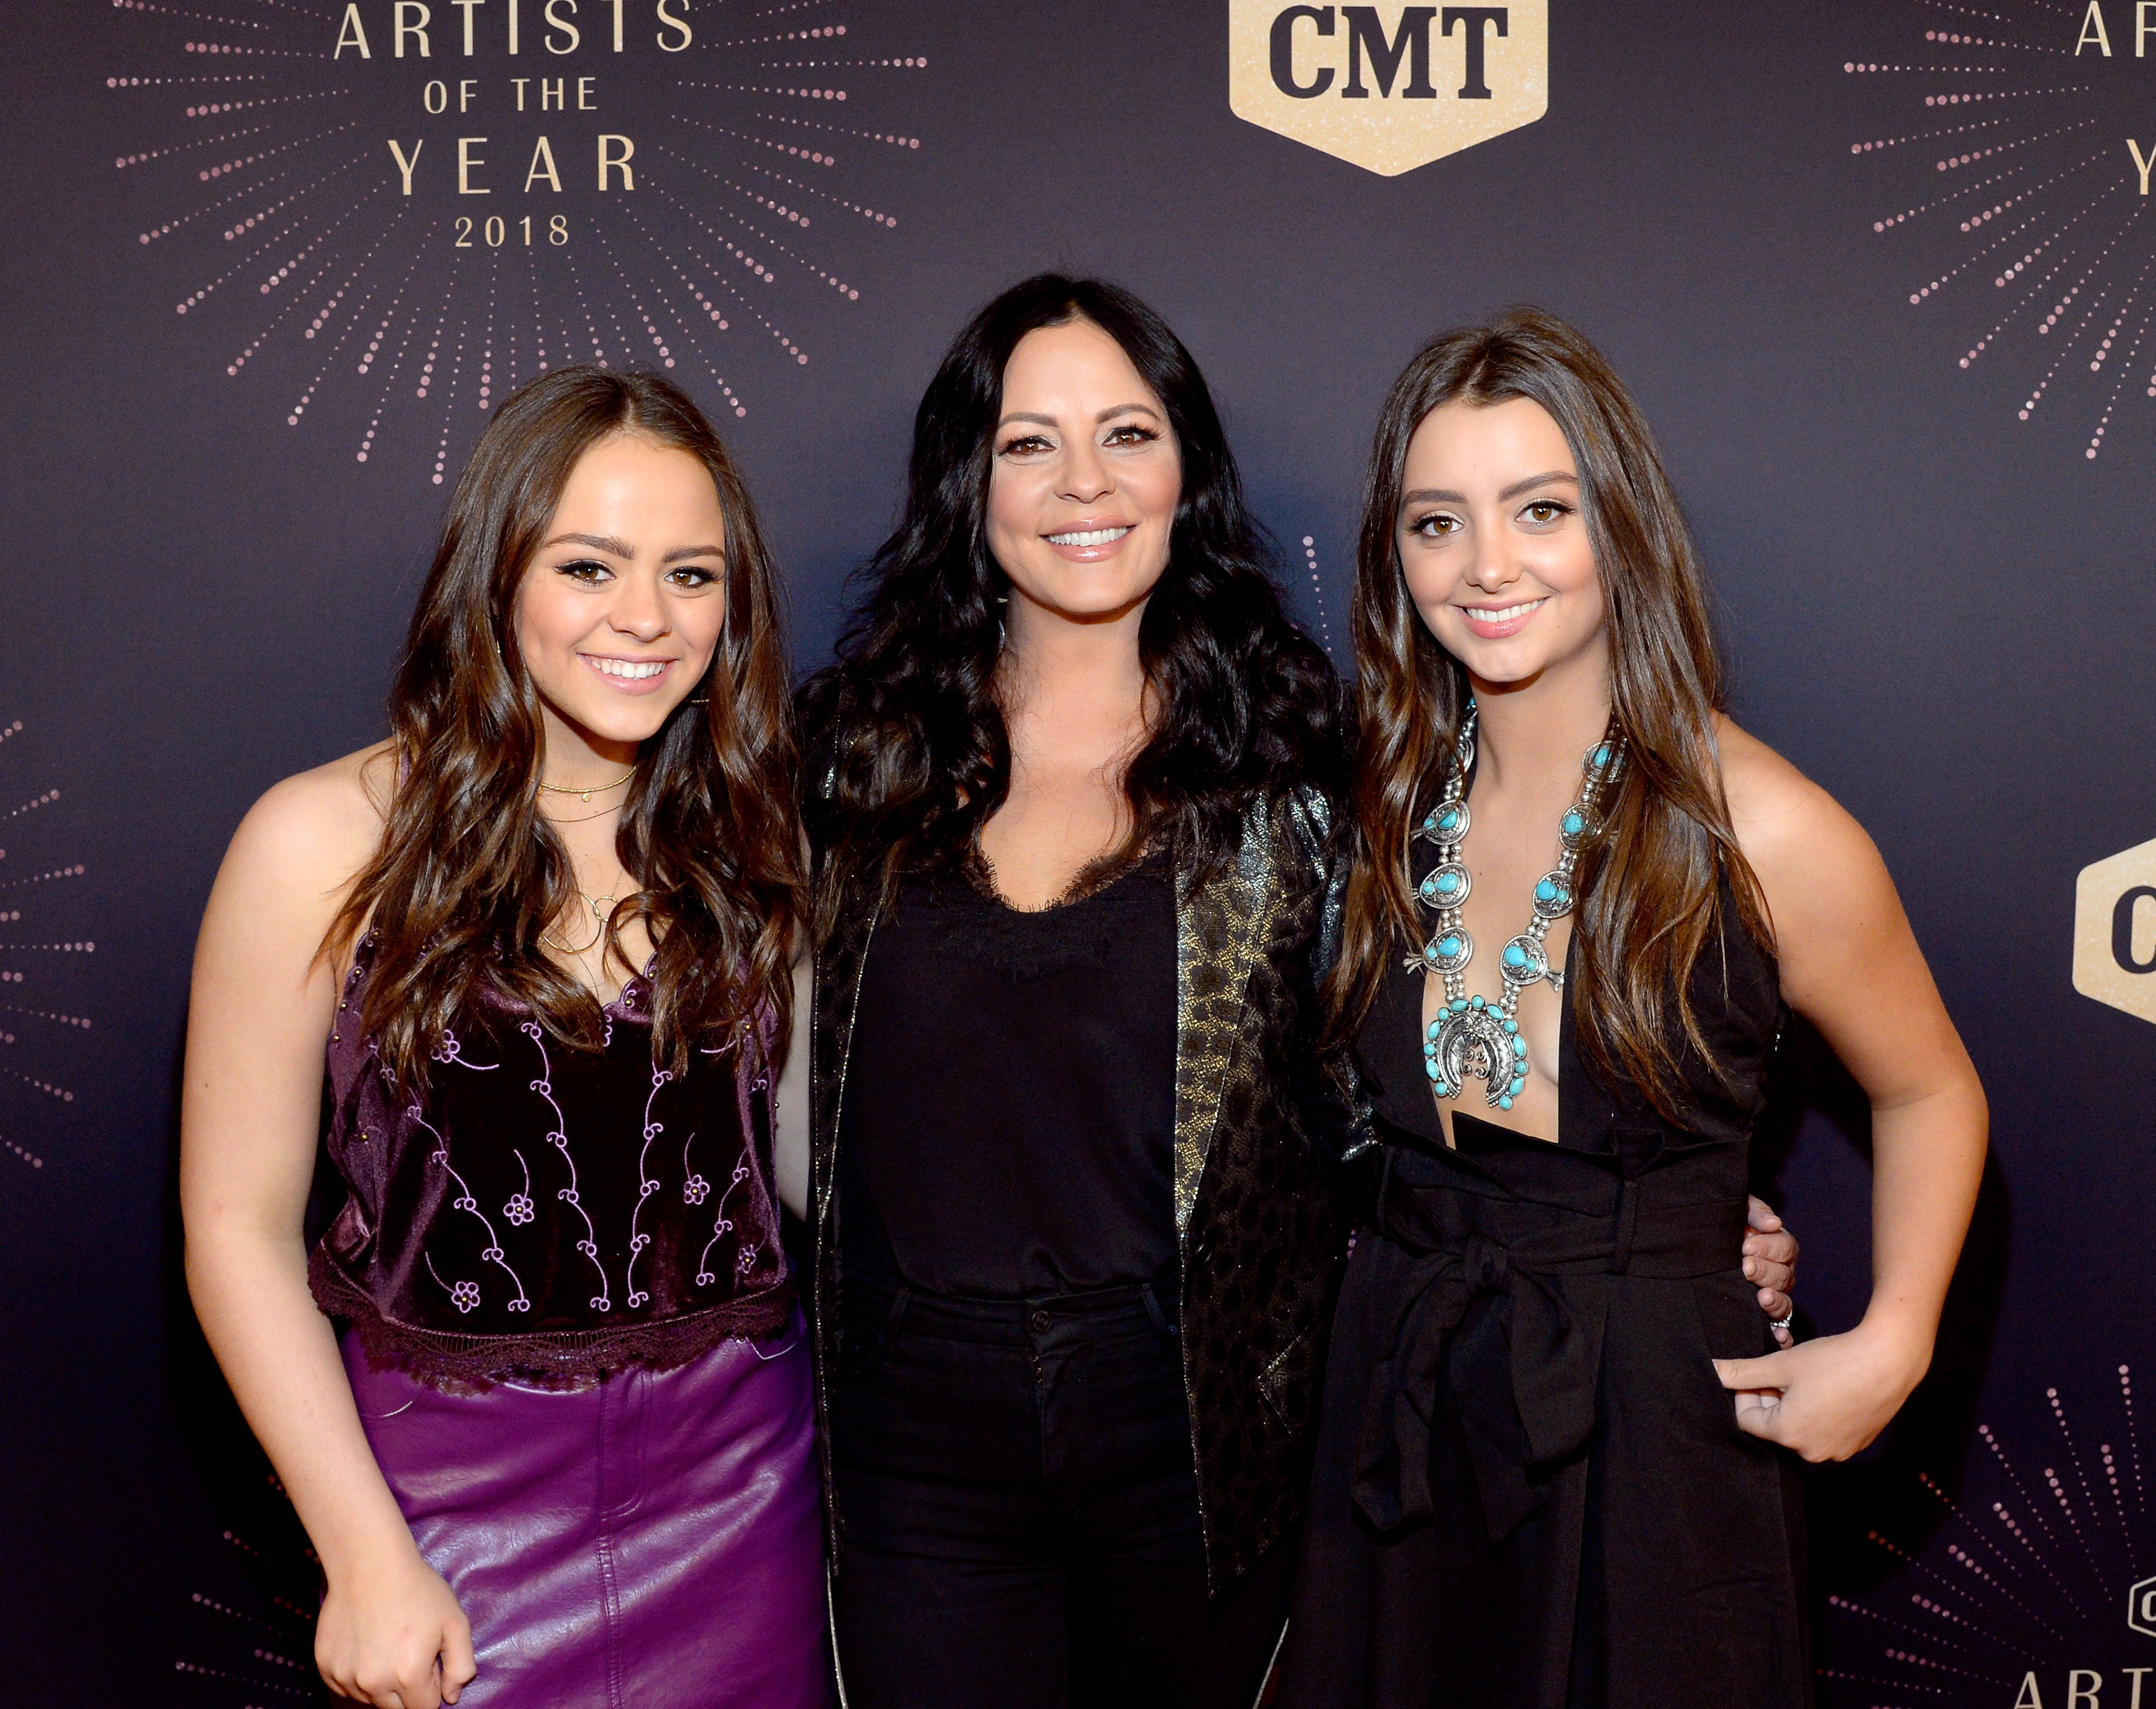 Sara evans and teen picture